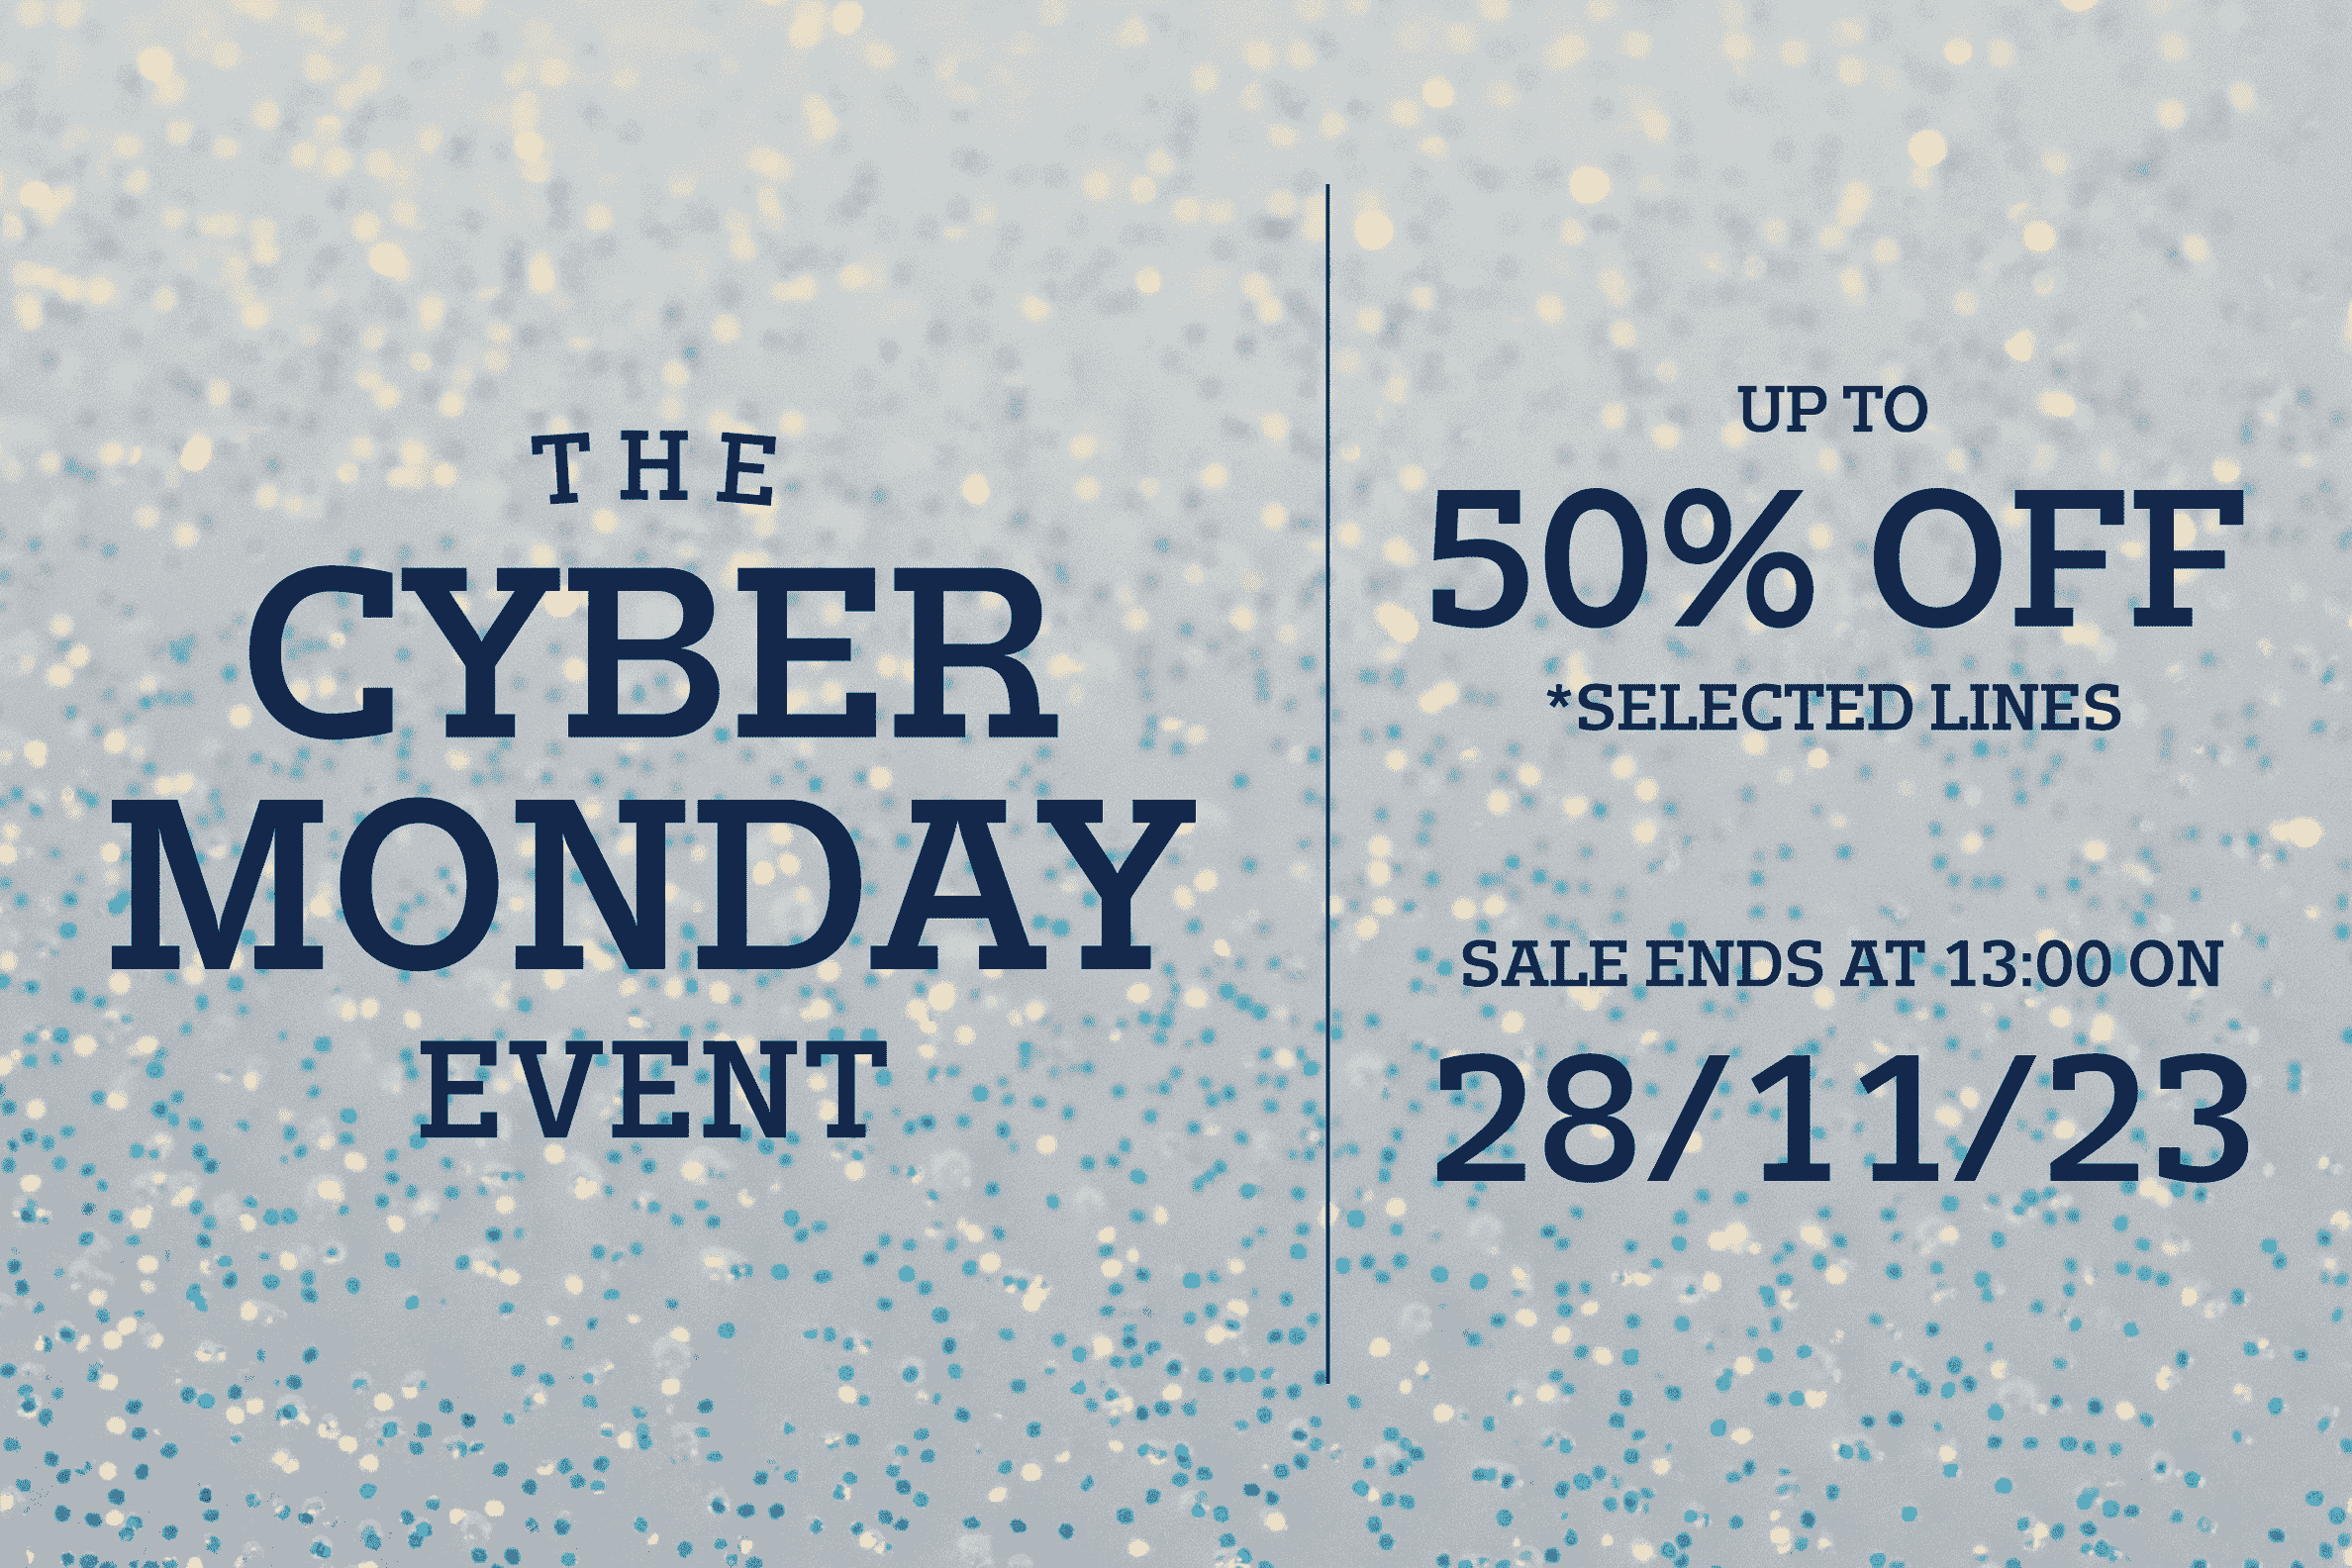 The Cyber Monday Event